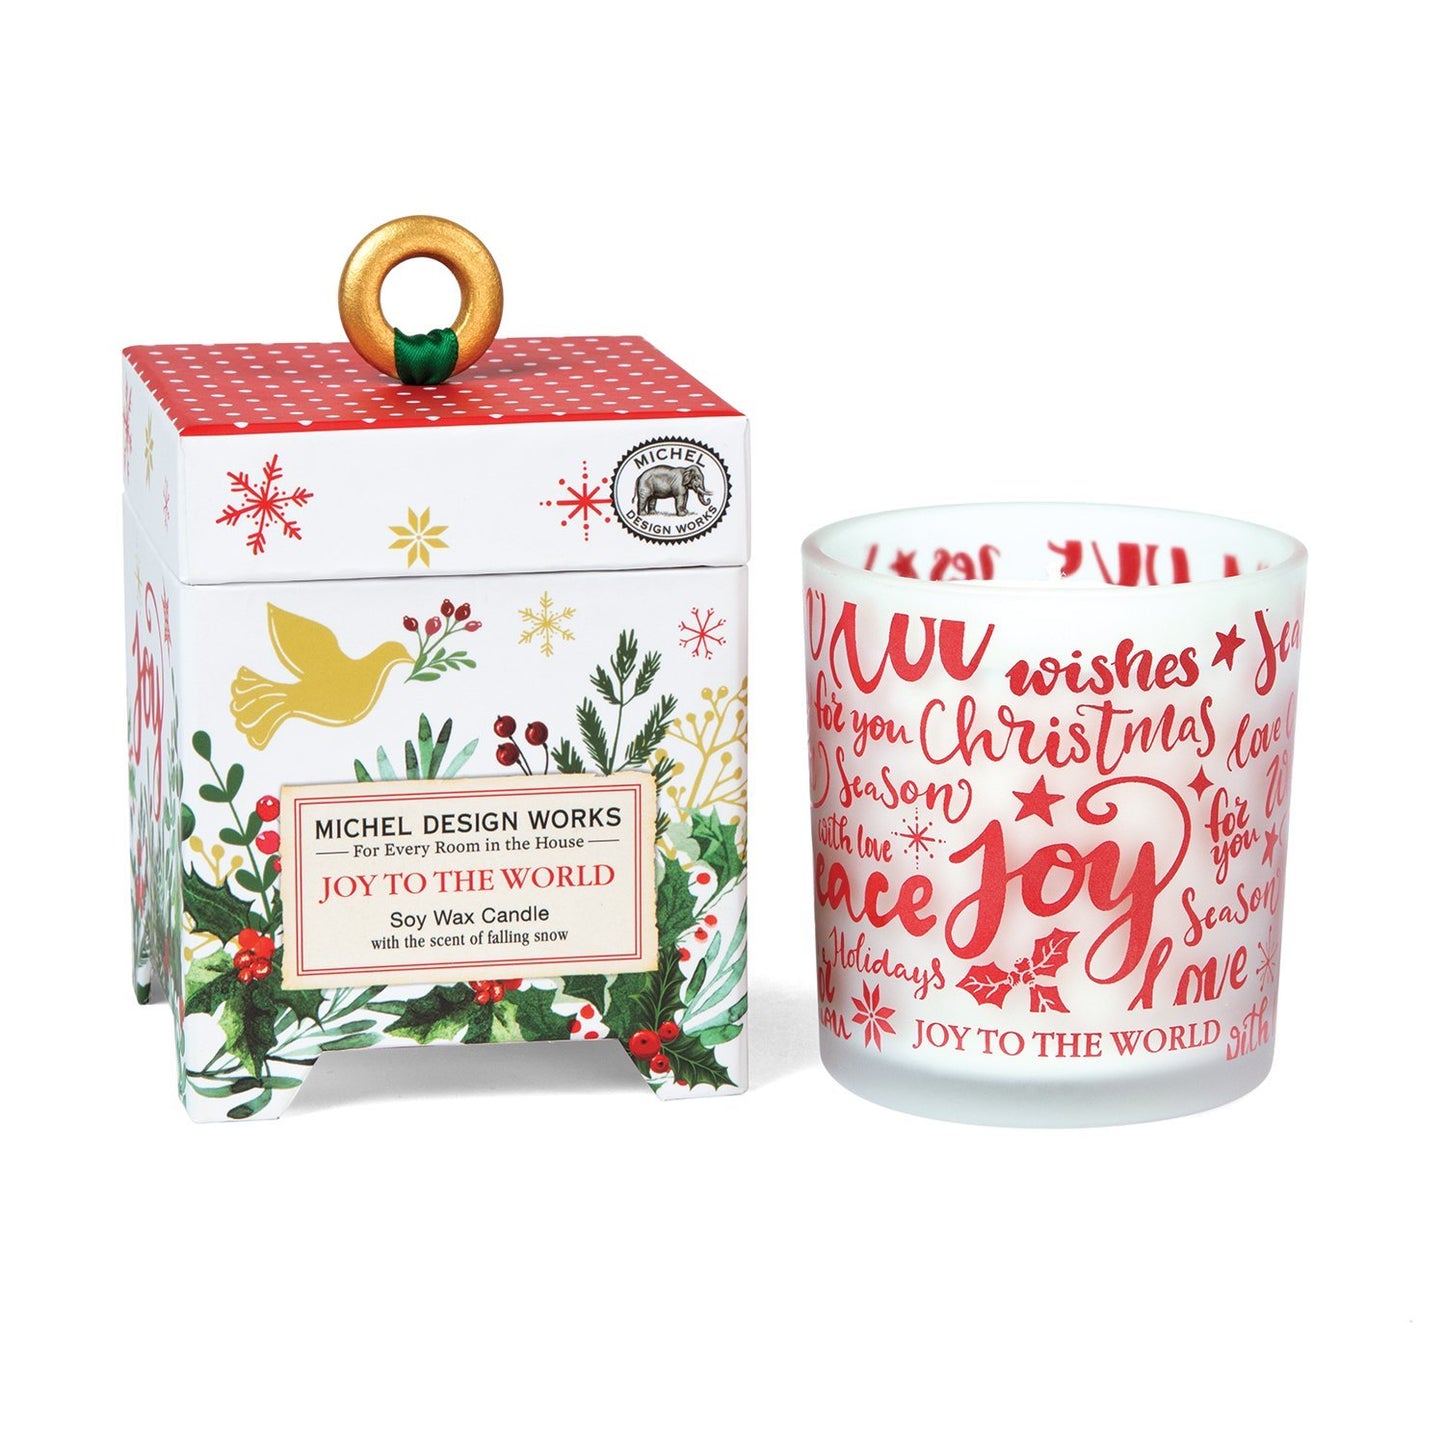 Joy to the World 6.5 oz. Soy Wax Candle